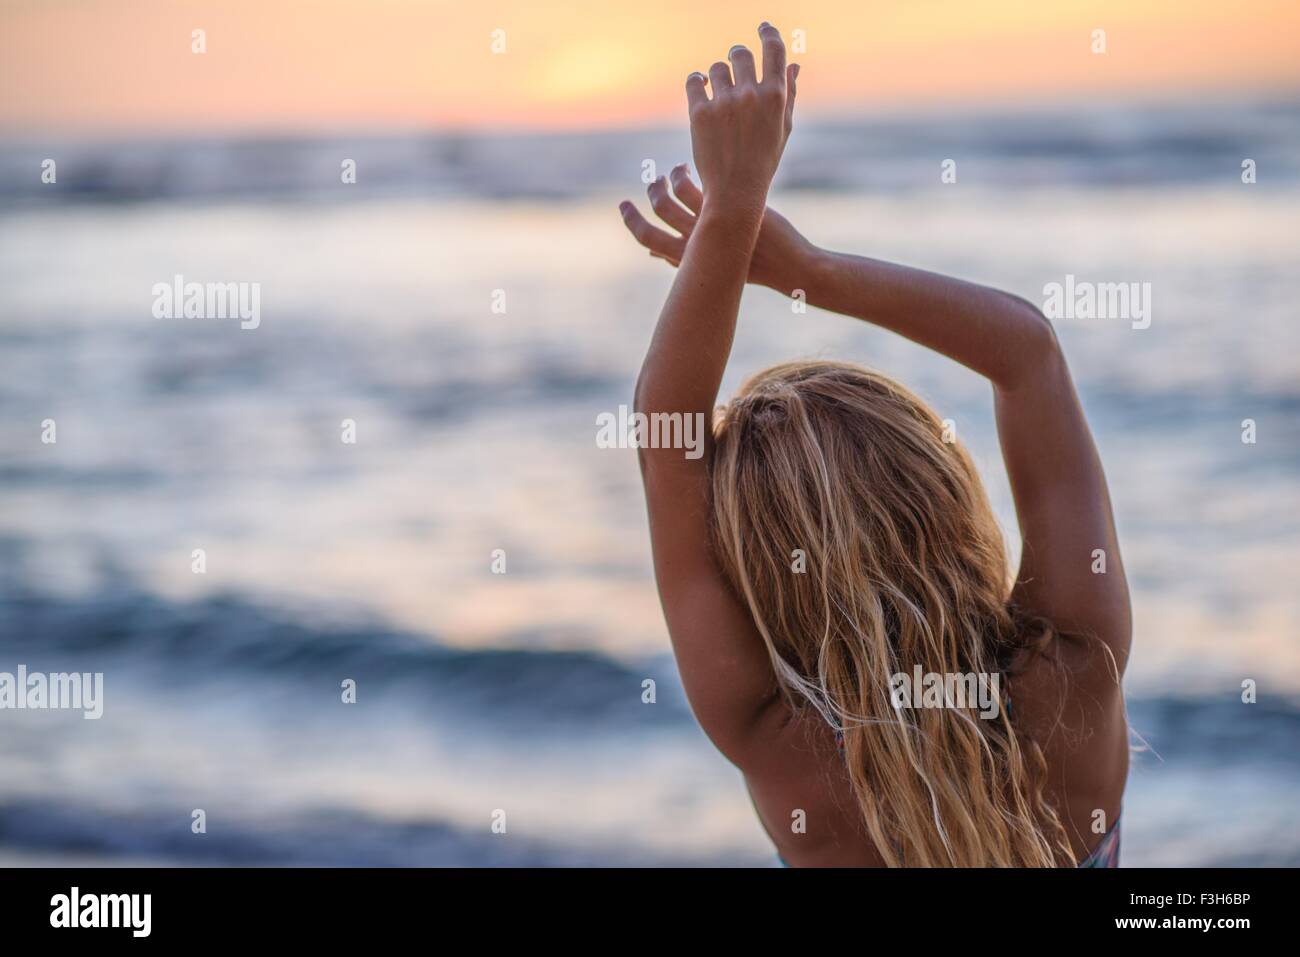 Rear view of young woman with arms raised on beach at sunset Stock Photo